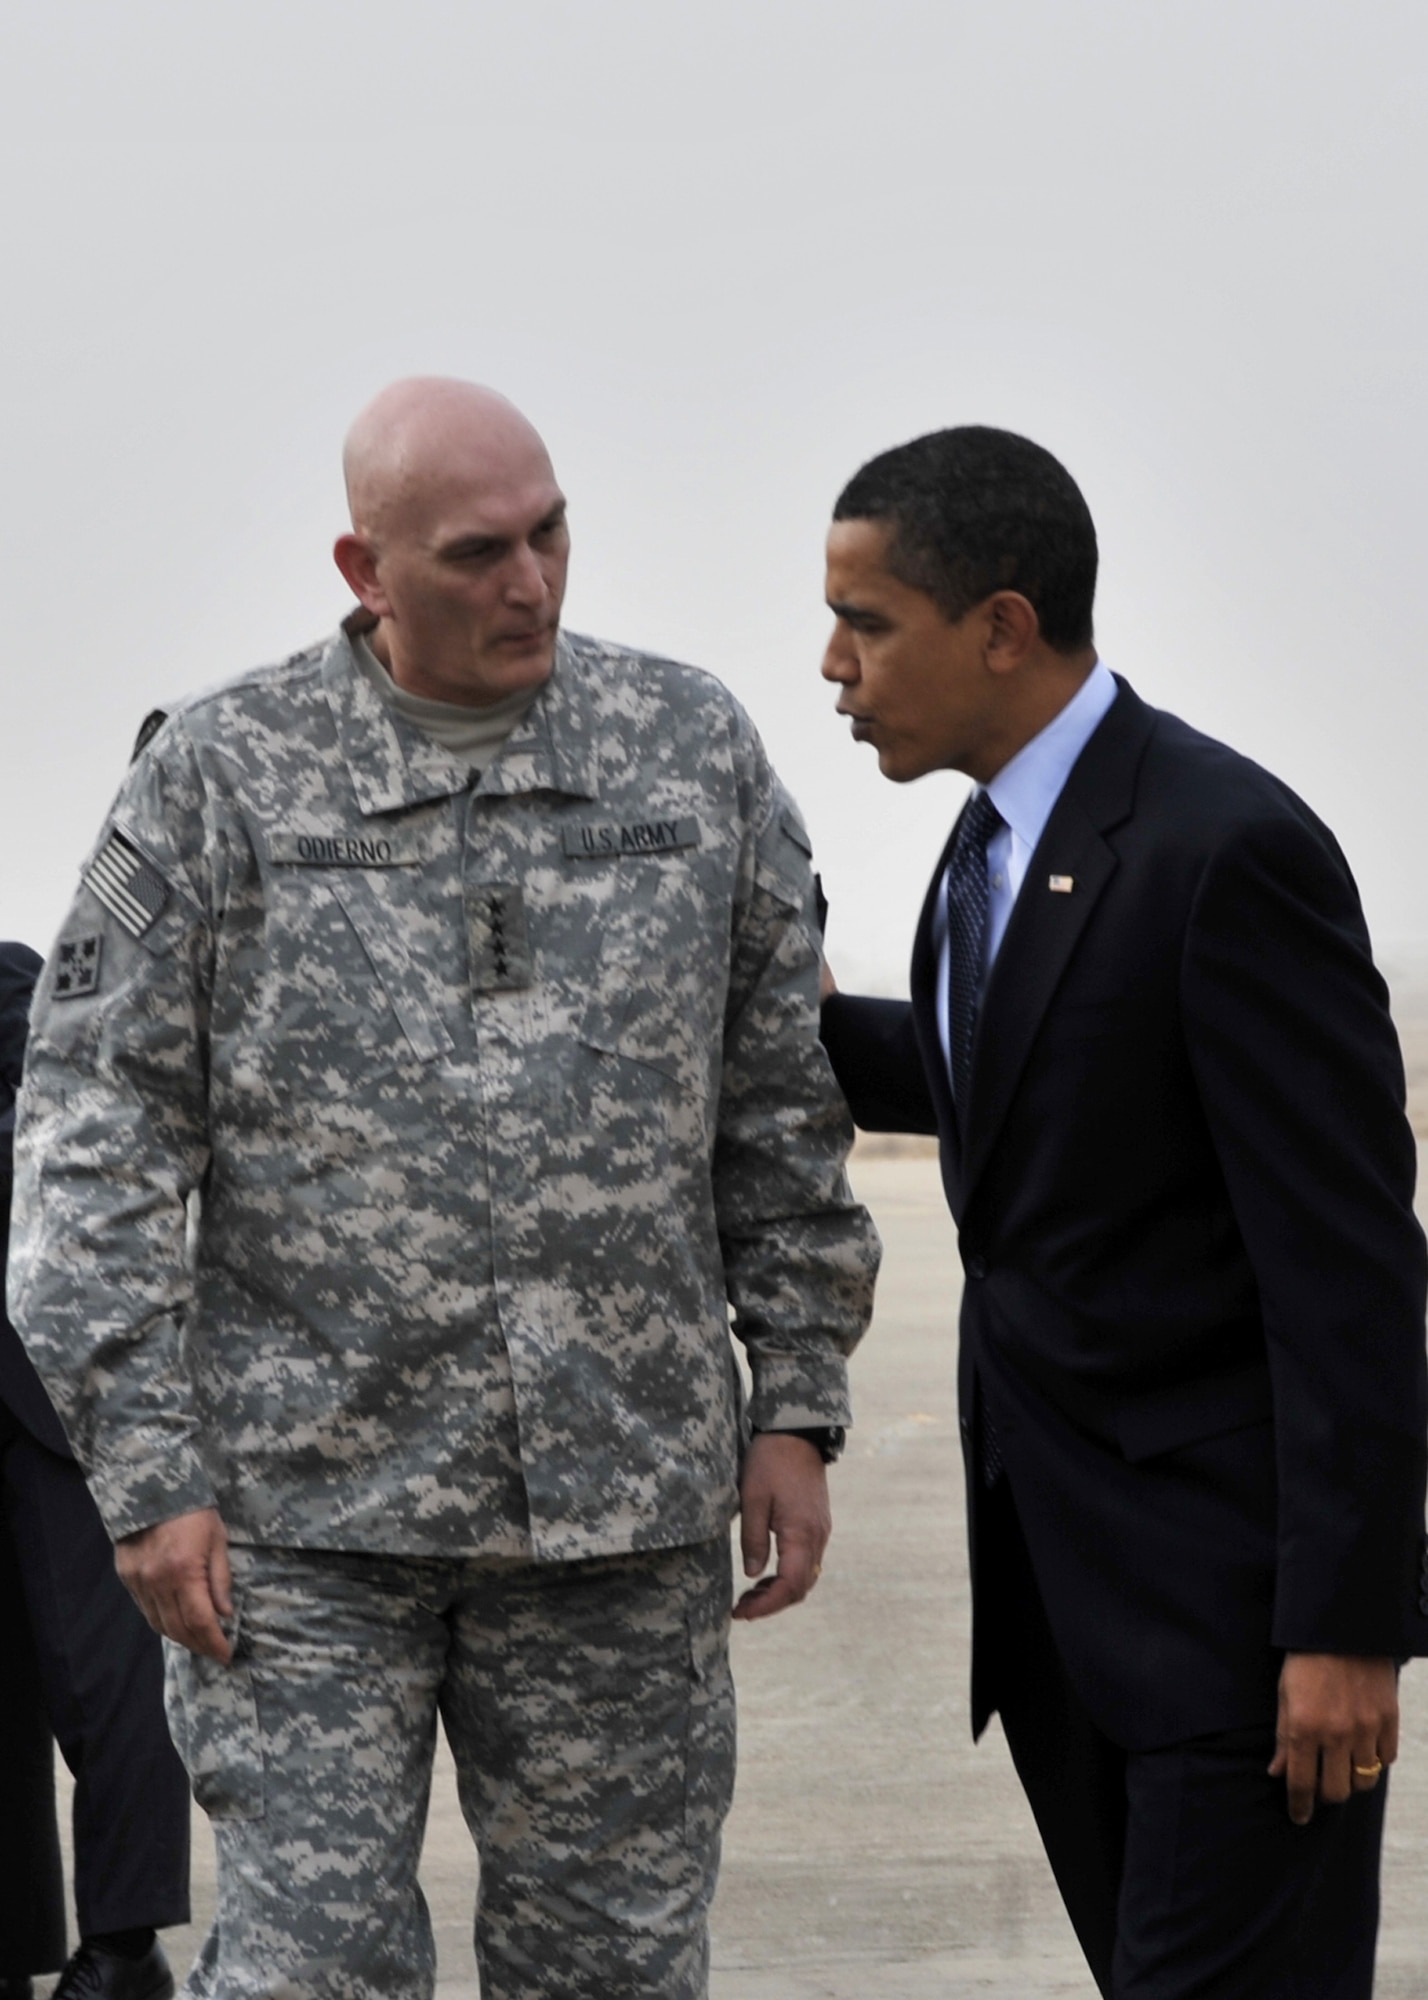 SATHER AIR BASE, Iraq, - President Barack Obama talks with Gen. Ray Odierno, commanding general Multi-National Forces Iraq, just after landing in Air Force One on the flightline here April 7. Shortly after arriving, the president addressed a crowd of nearly 1,500, servicemembers, government civilians and contractors, at Al Faw Palace, Camp Victory, Iraq. During his speech, the president commended servicemembers for their focus and dedication and promised them his support while in office. (U.S. Air Force Photo by Staff Sgt. Amanda Currier)